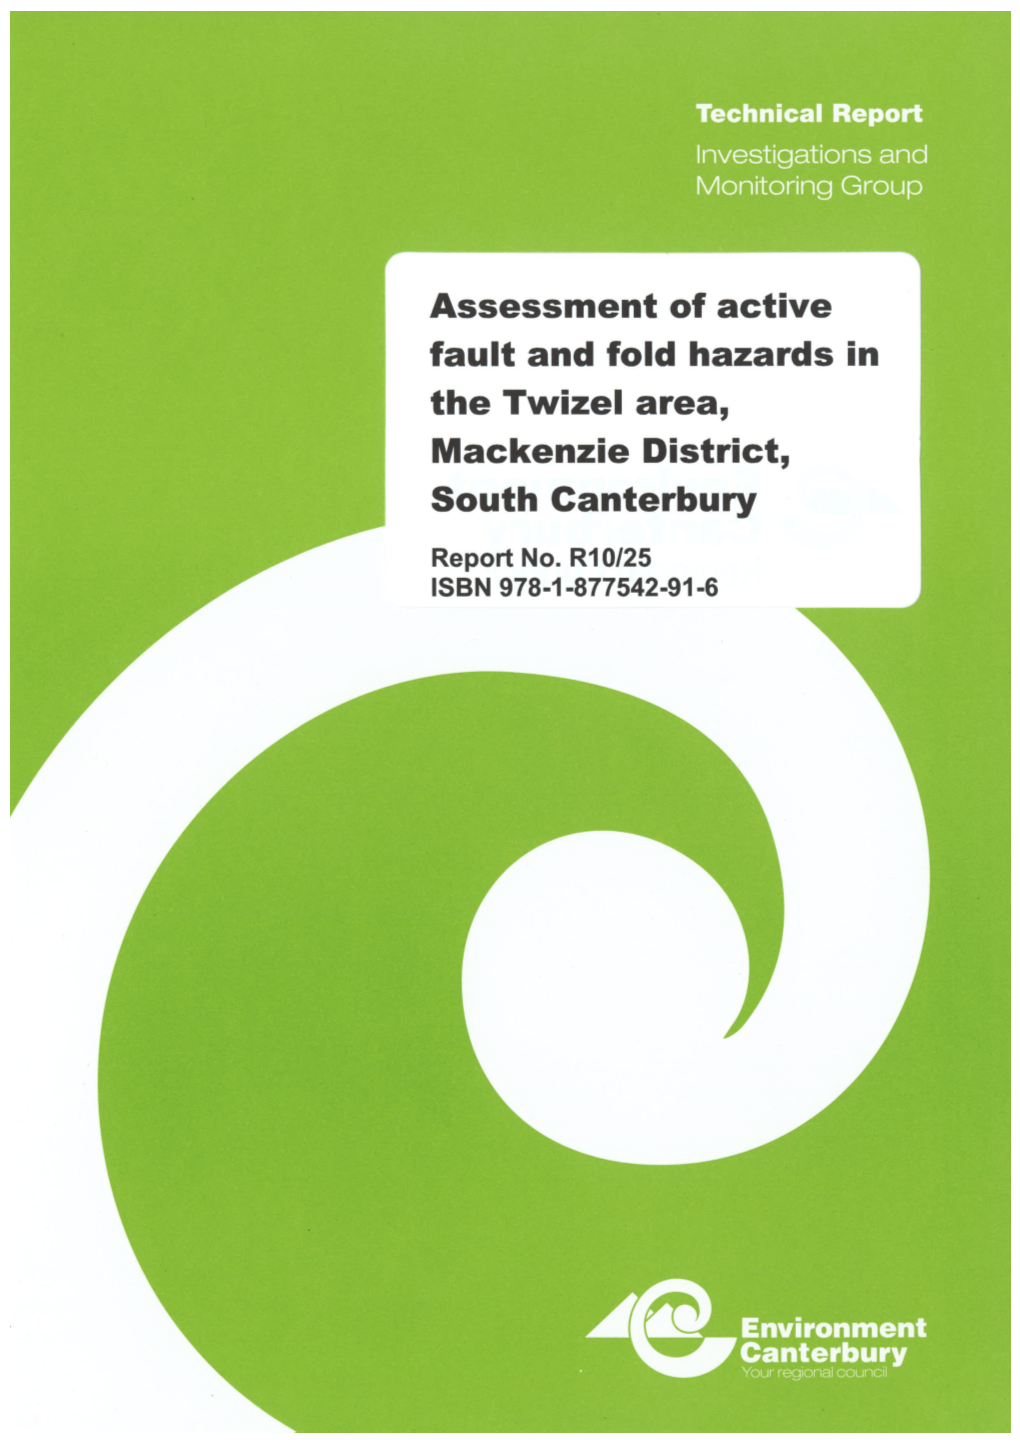 Assessment of Active Fault and Fold Hazards in the Twizel Area, Mackenzie District, South Canterbury Report No